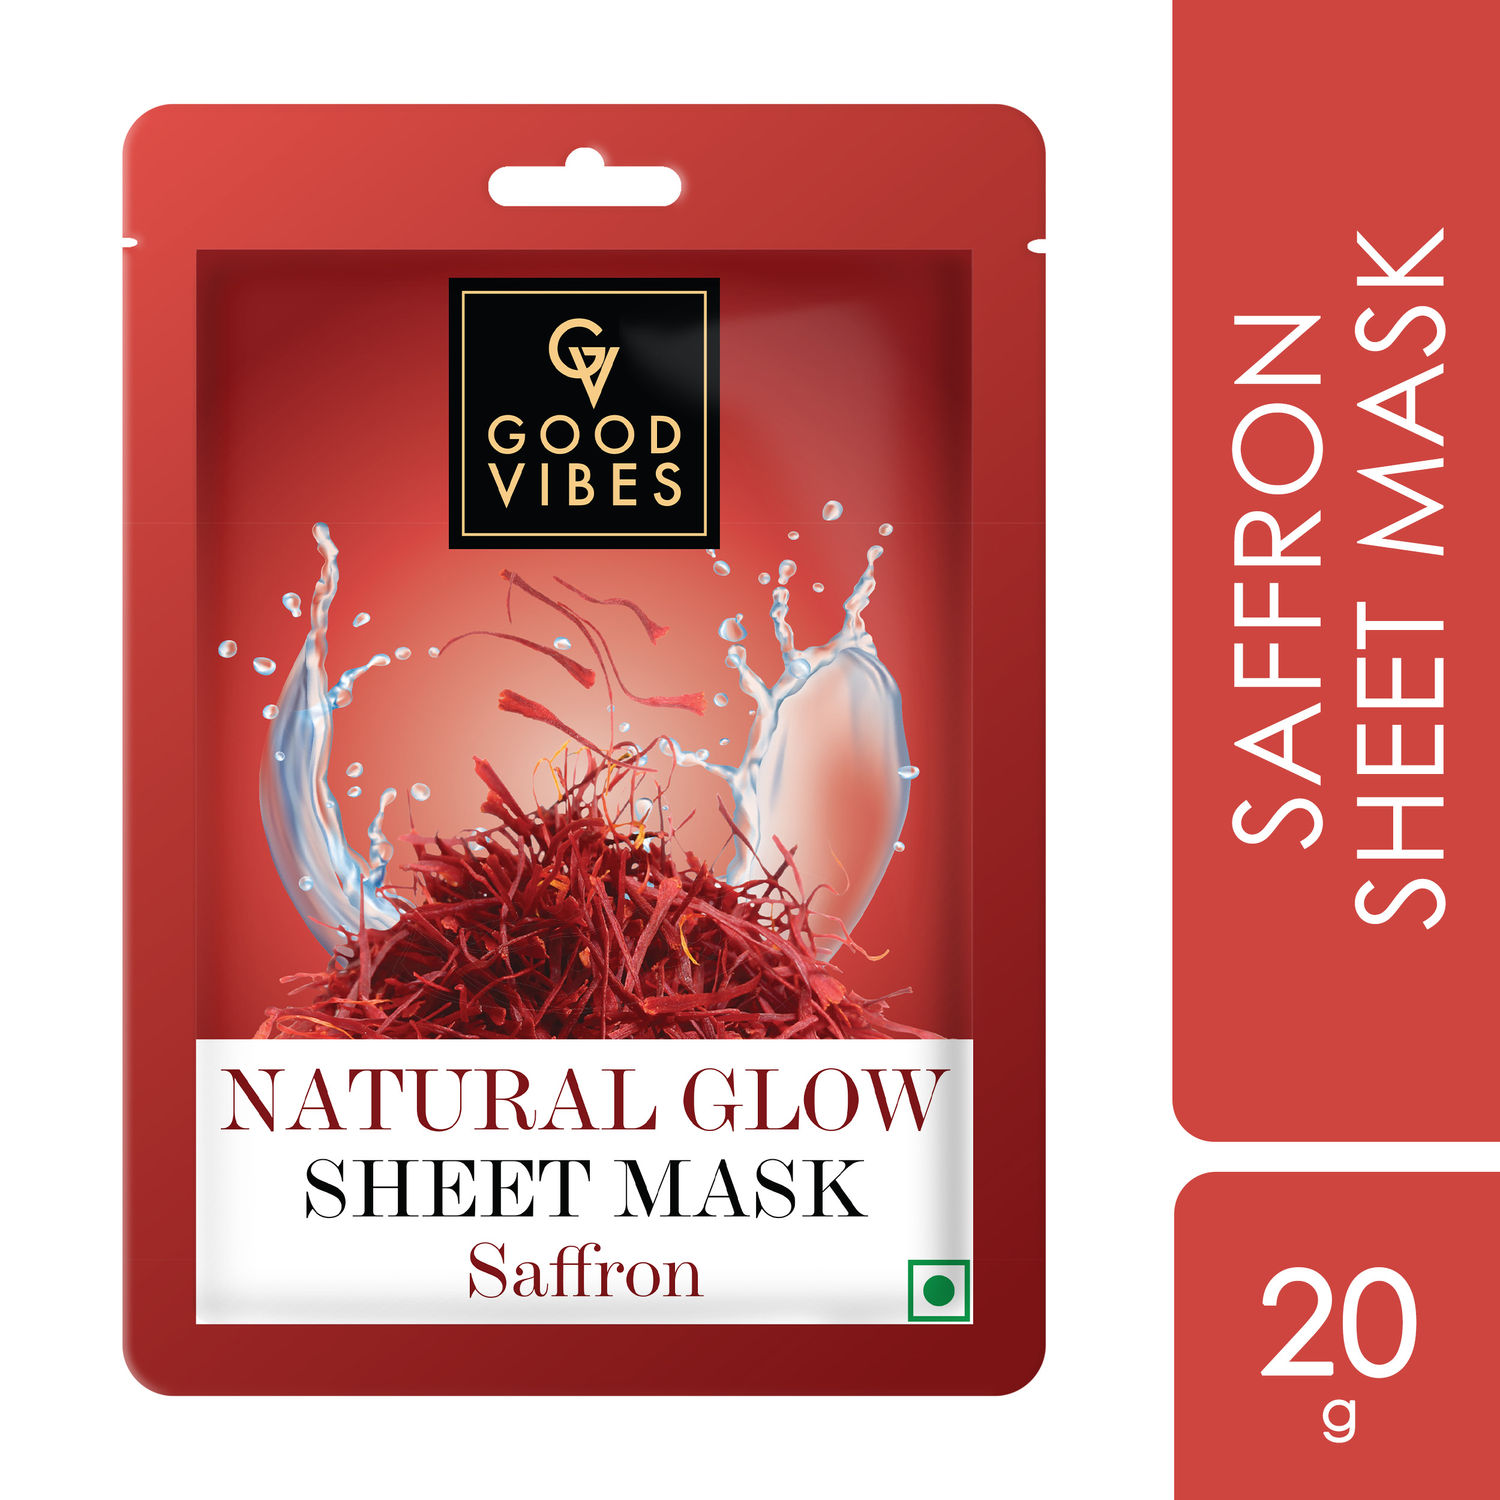 Good Vibes Saffron Natural Glow Sheet Mask | For Glowing & Smooth Skin | Fights Signs Of Ageing, Treats Rough & Dull Skin (20 ml)